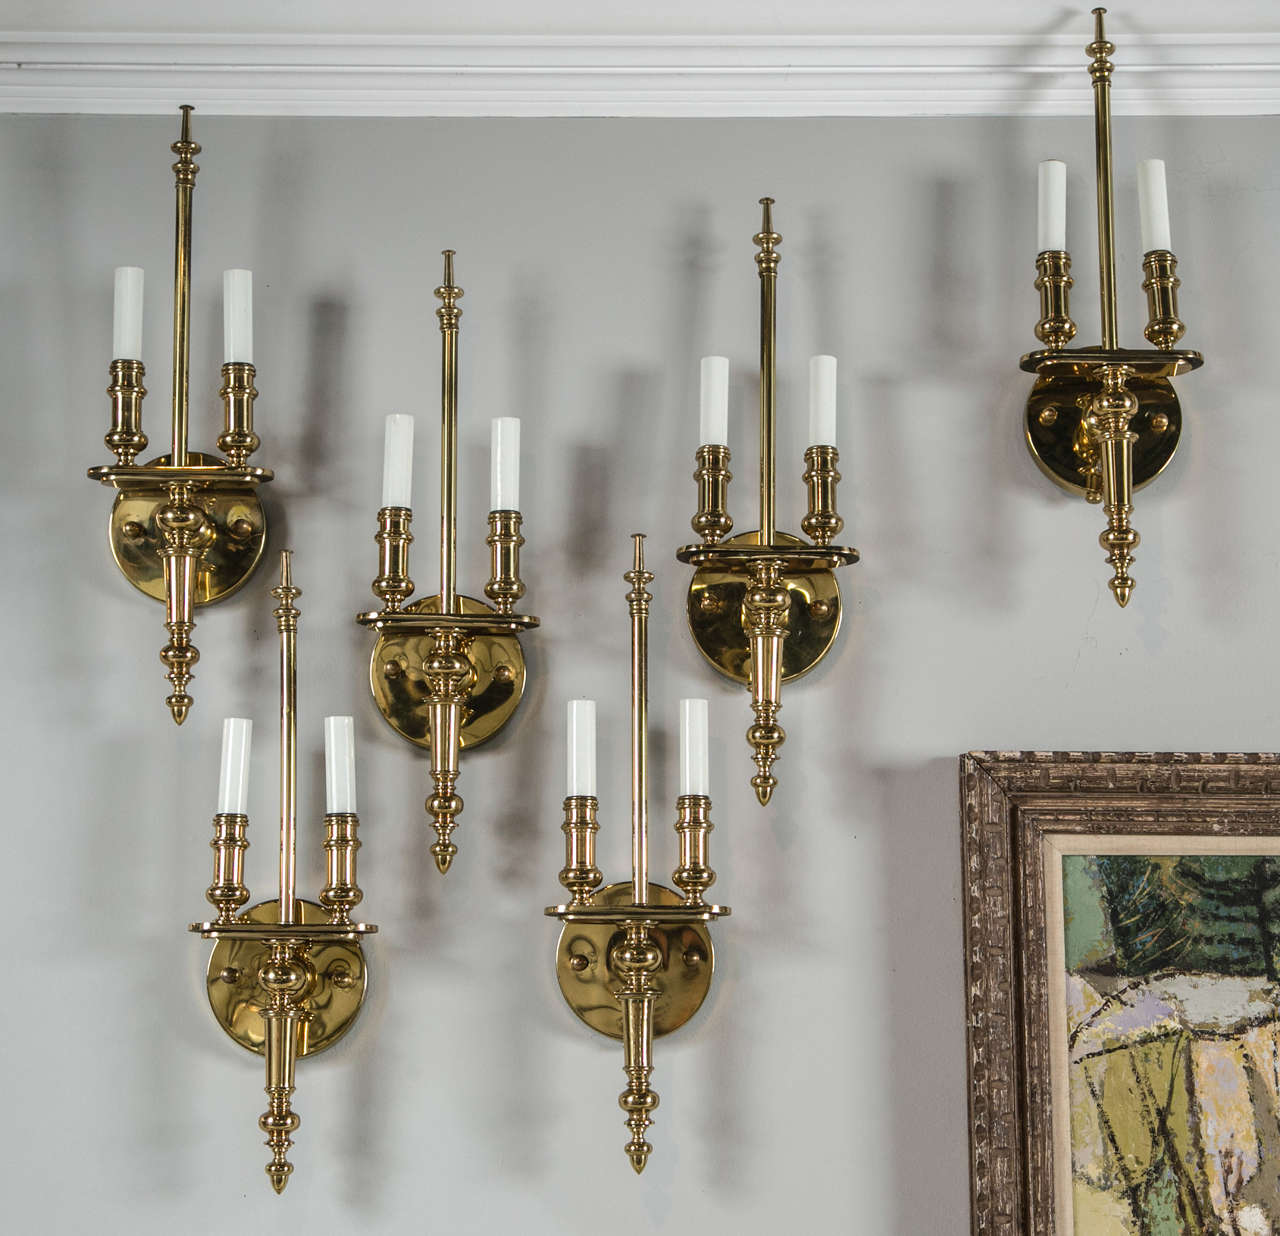 Pair of Solid brass sconces. Each scone has two candles and an acorn finial detail on bottom.